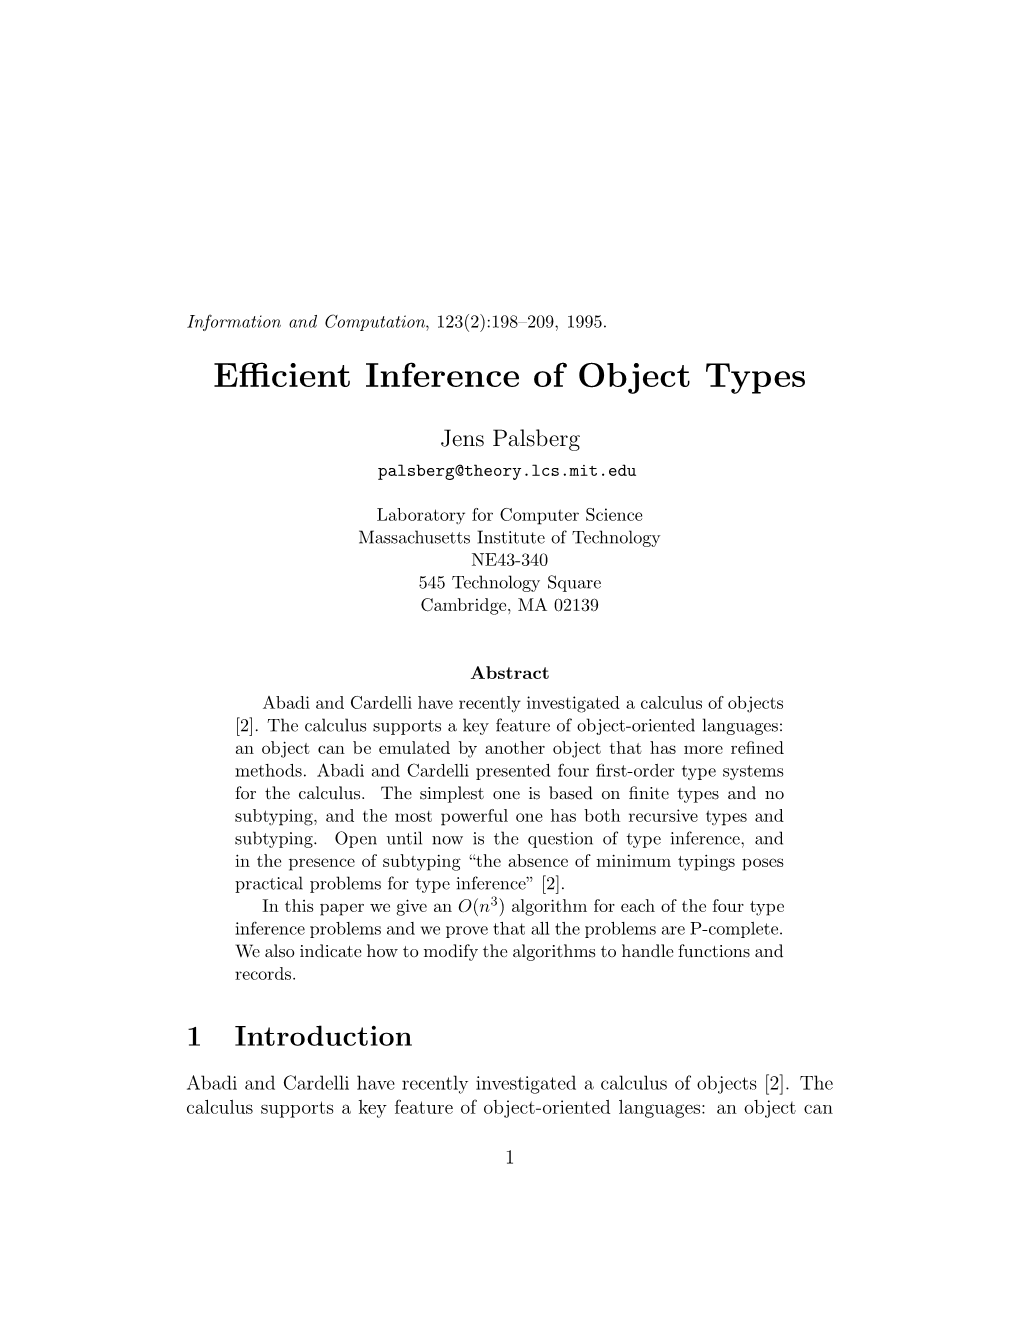 Efficient Inference of Object Types